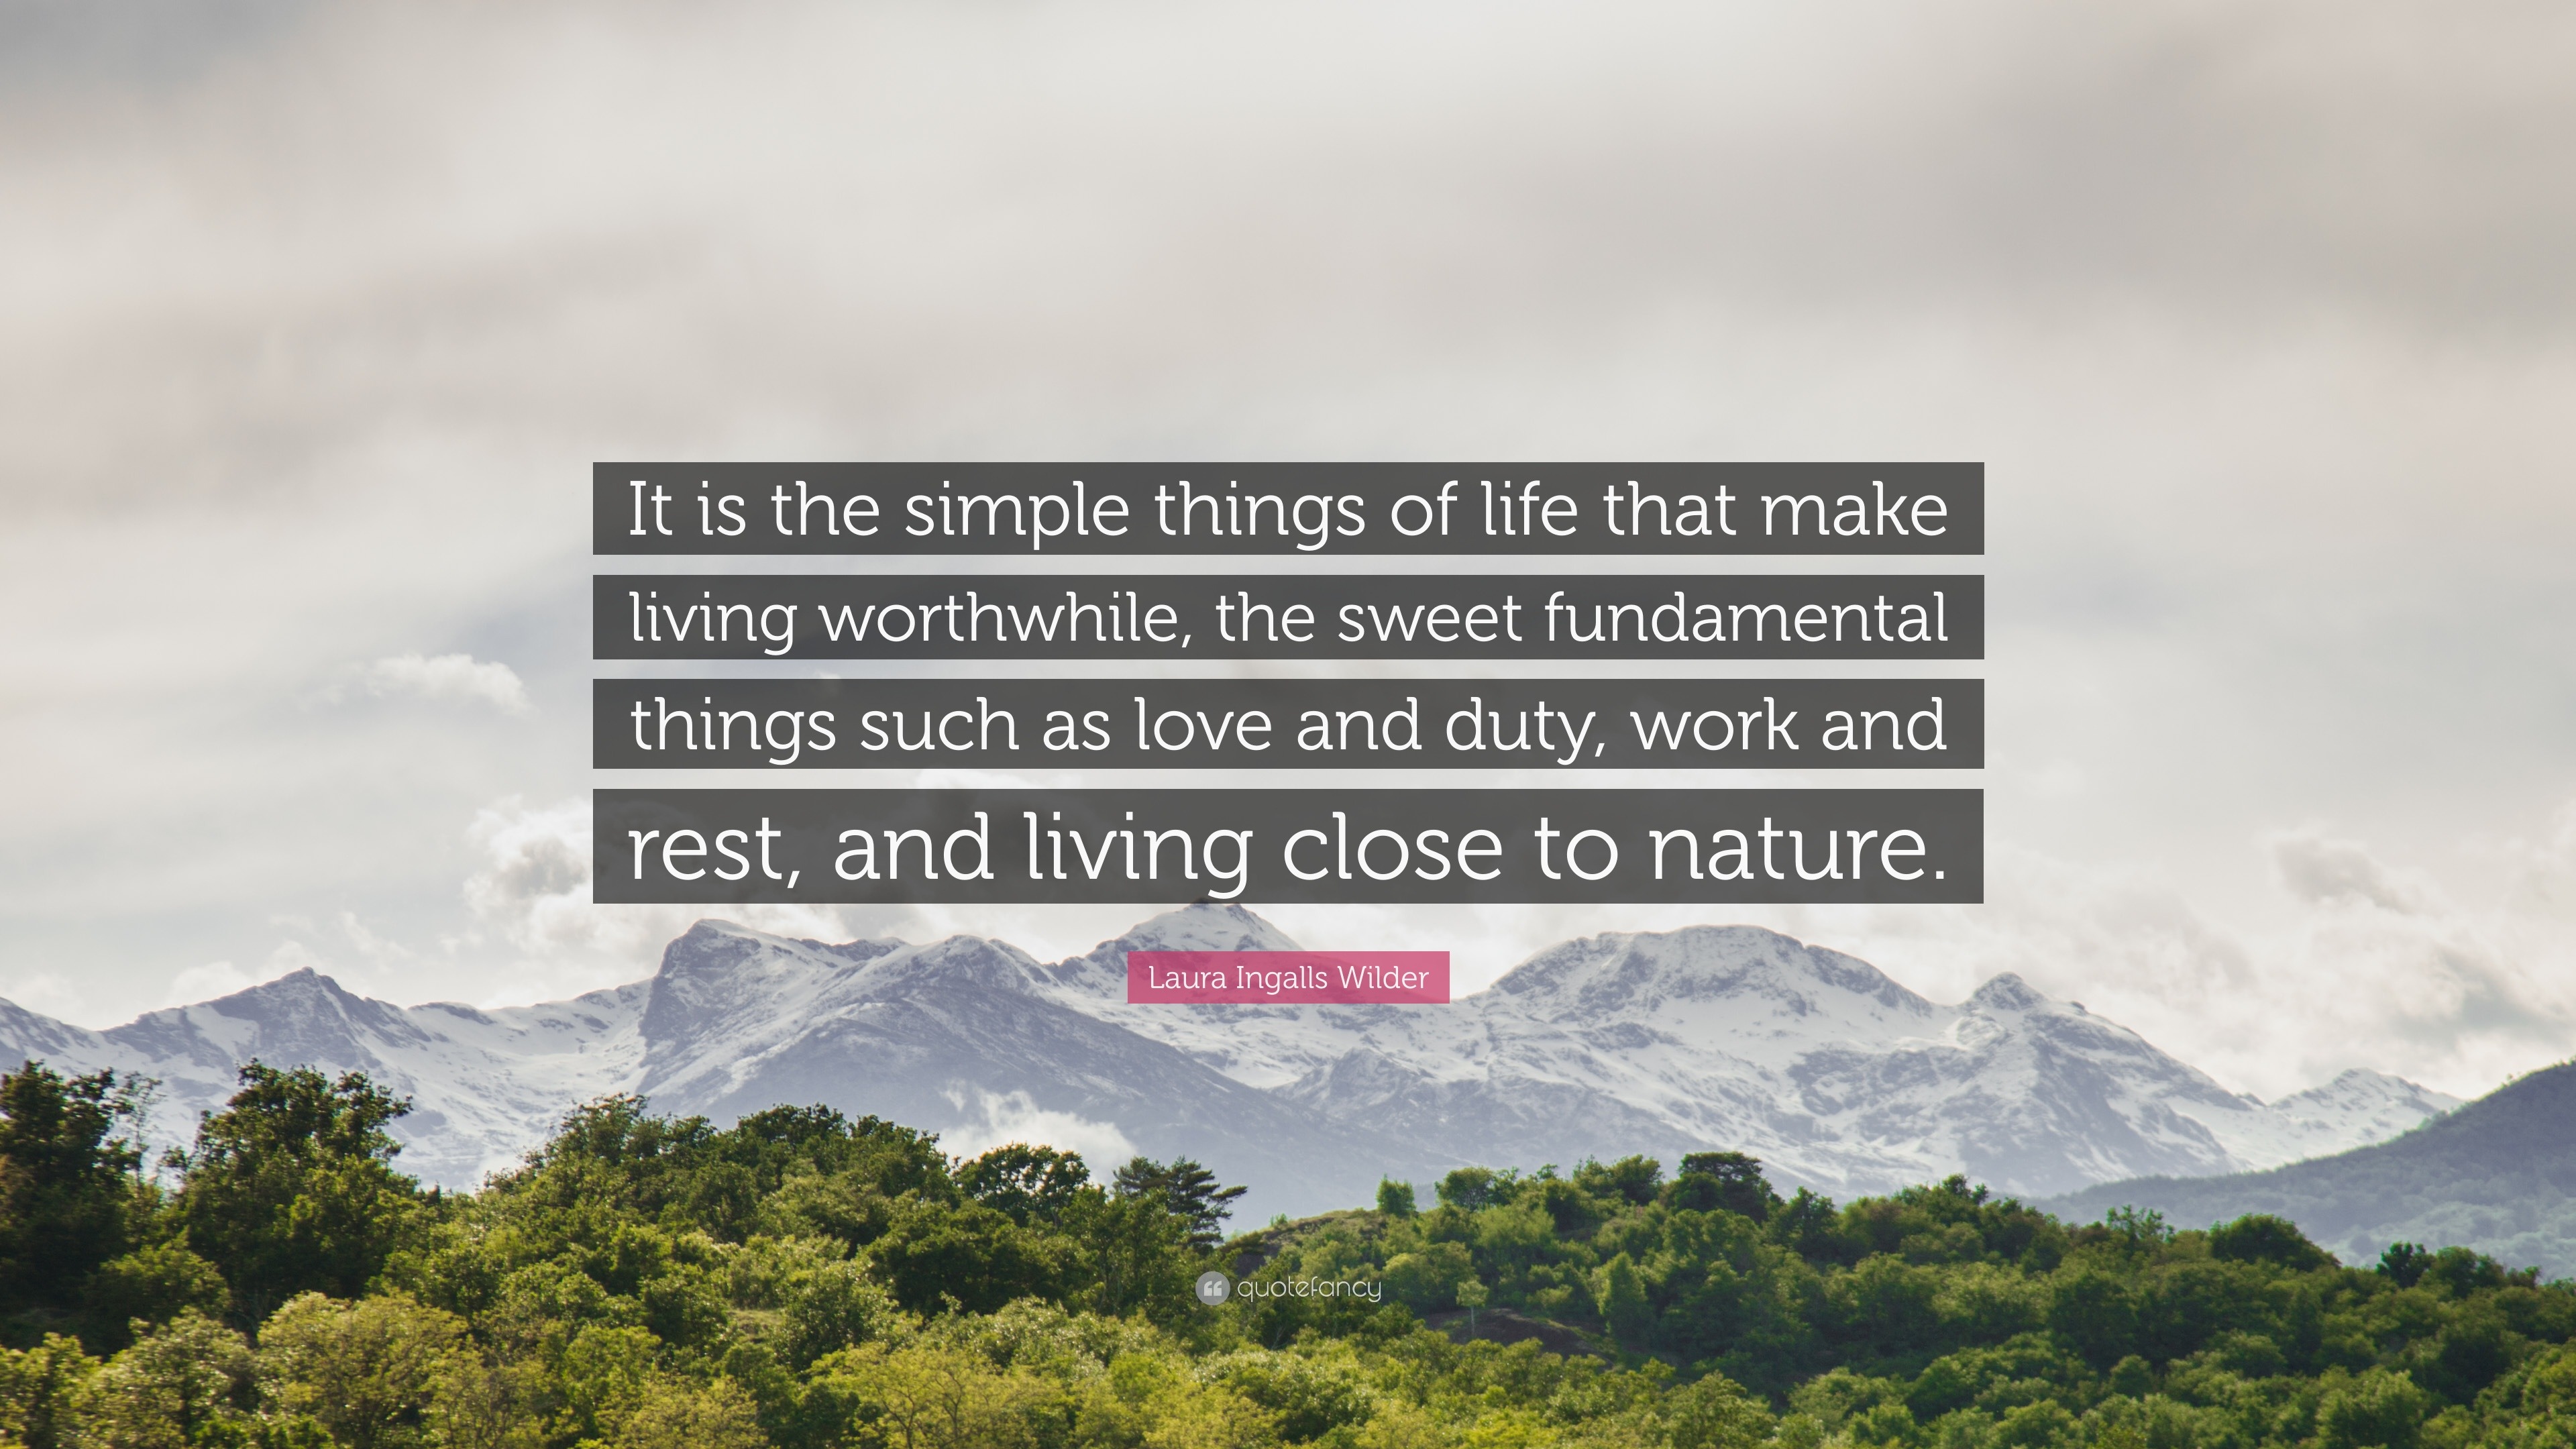 Laura Ingalls Wilder Quote “It is the simple things of life that make living